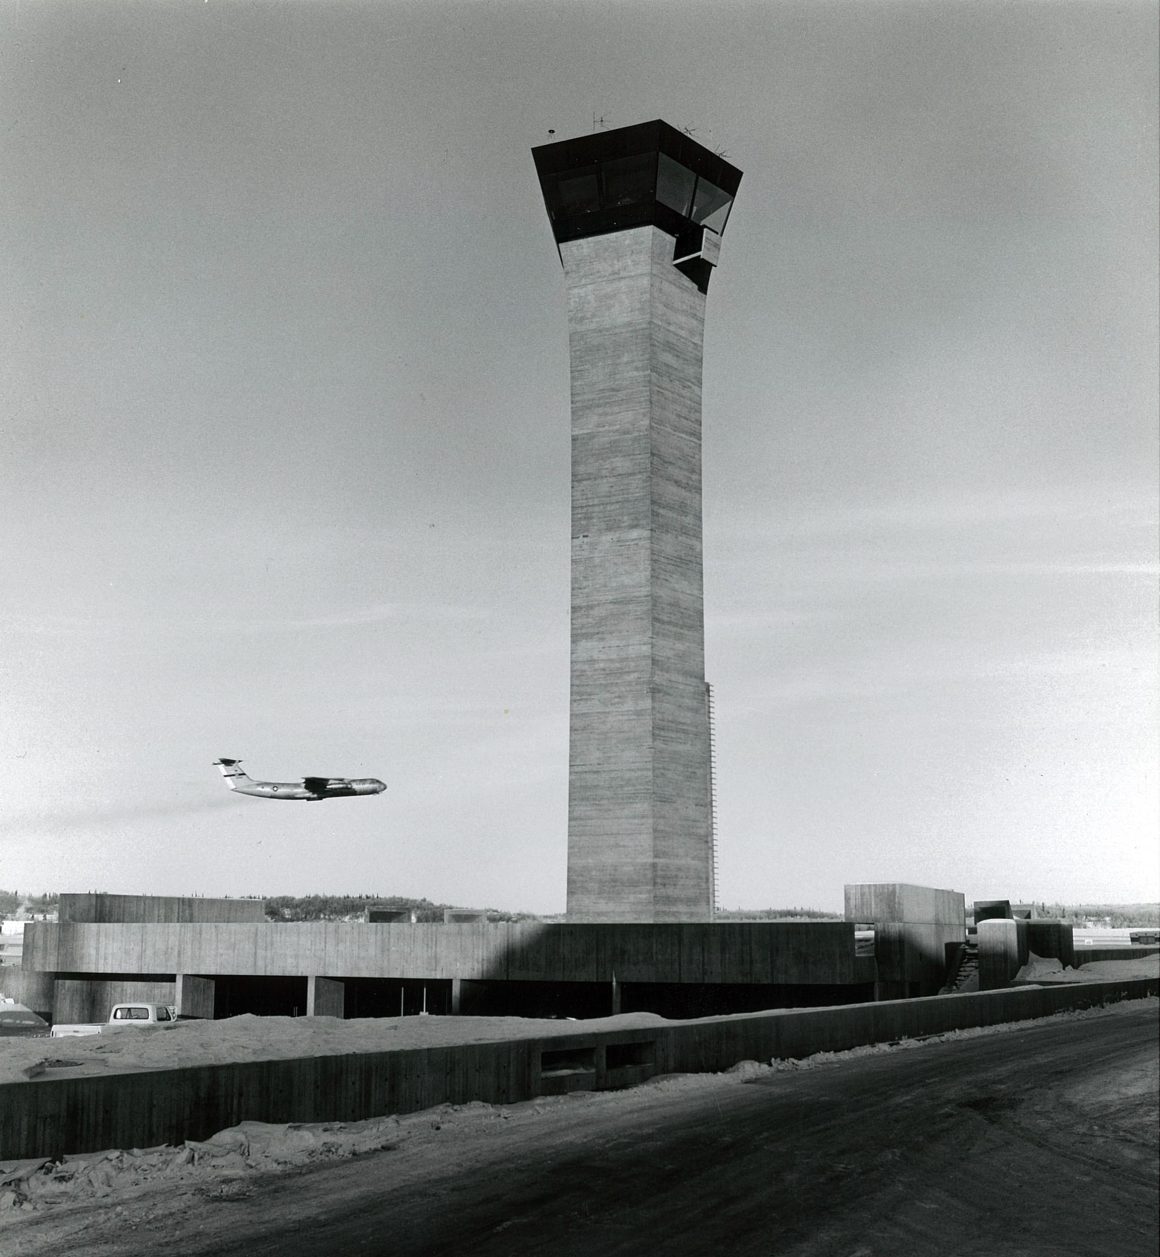 A first-generation control tower designed by architect IM Pei at Elmendorf AFB in Anchorage, Alaska